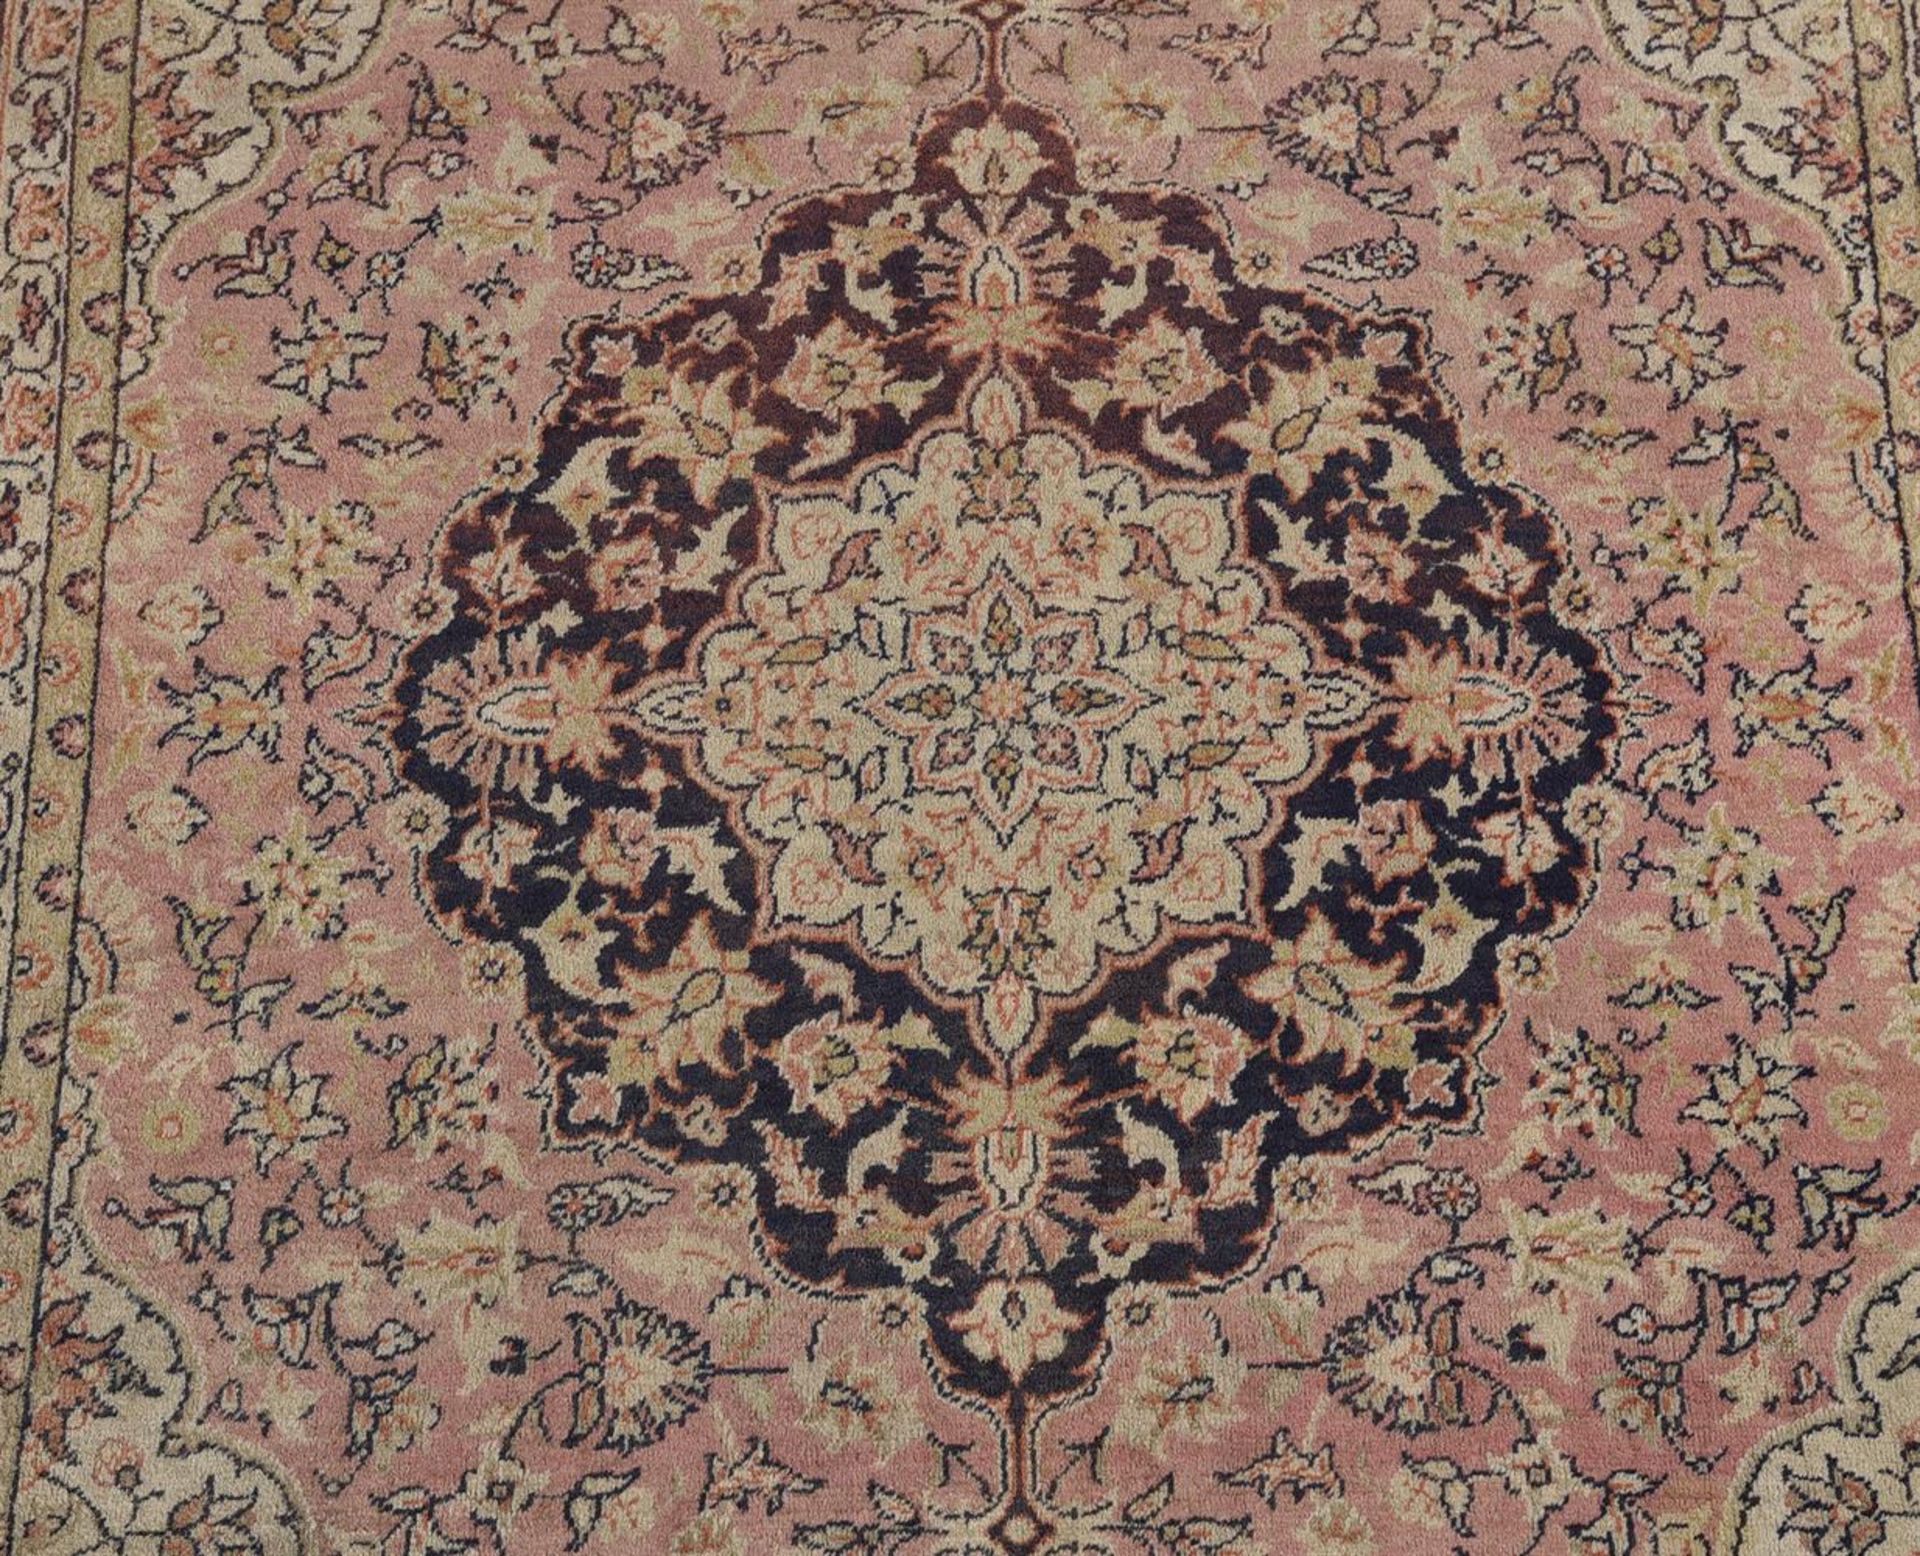 A TABRIZ RUG IN AUBUSSON STYLE - Image 2 of 3